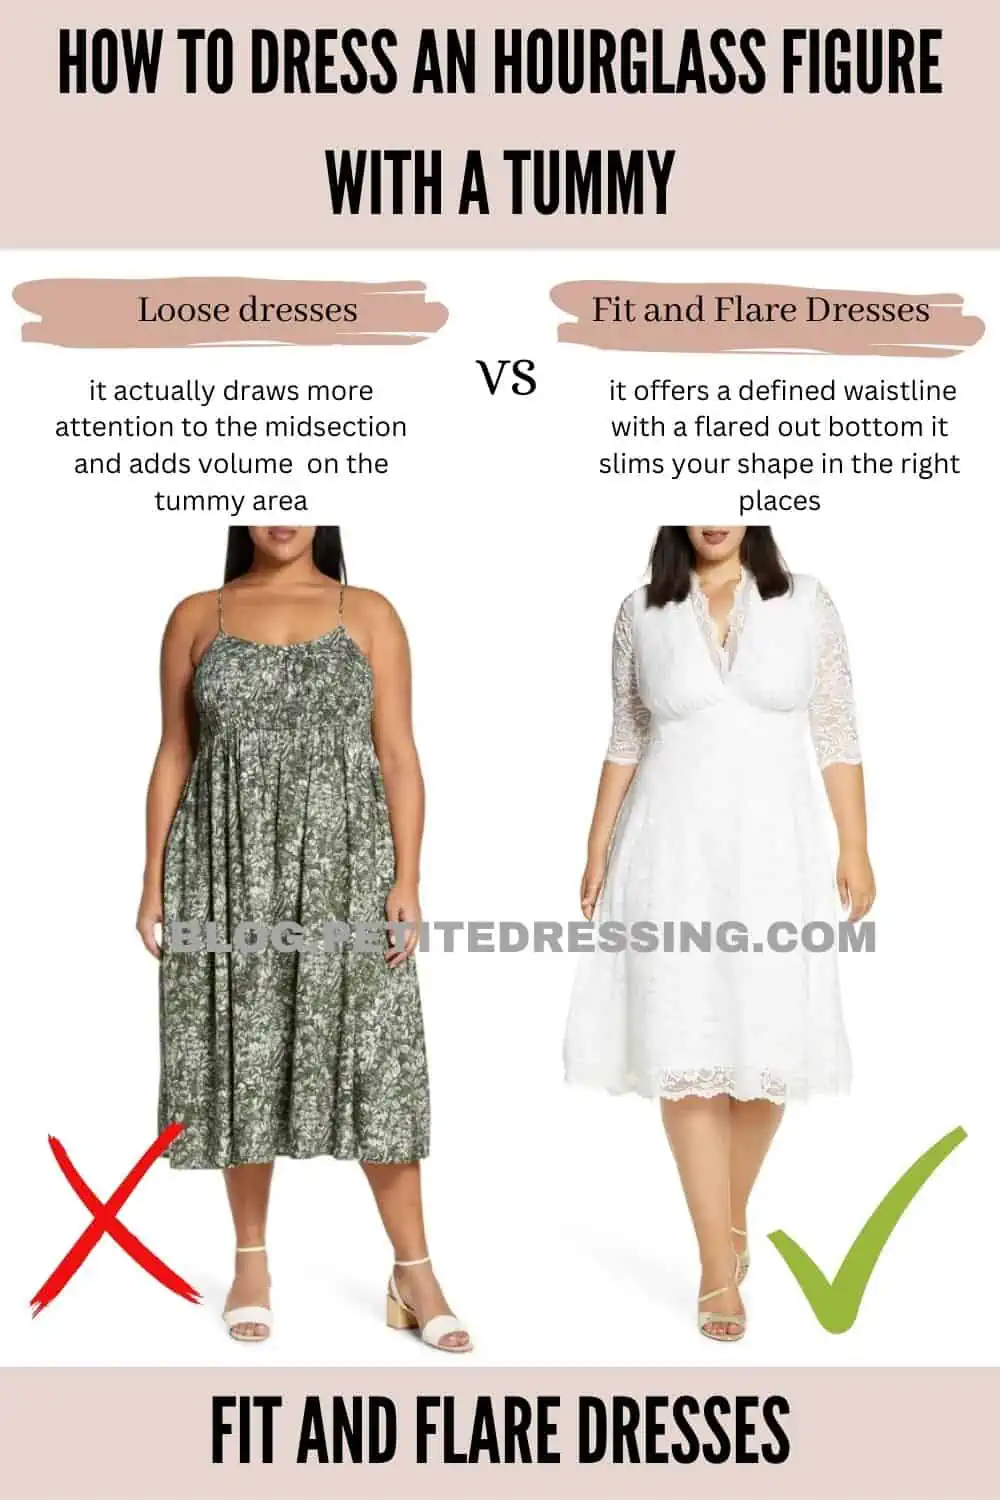 How to Dress an Hourglass Figure with a Tummy - Petite Dressing